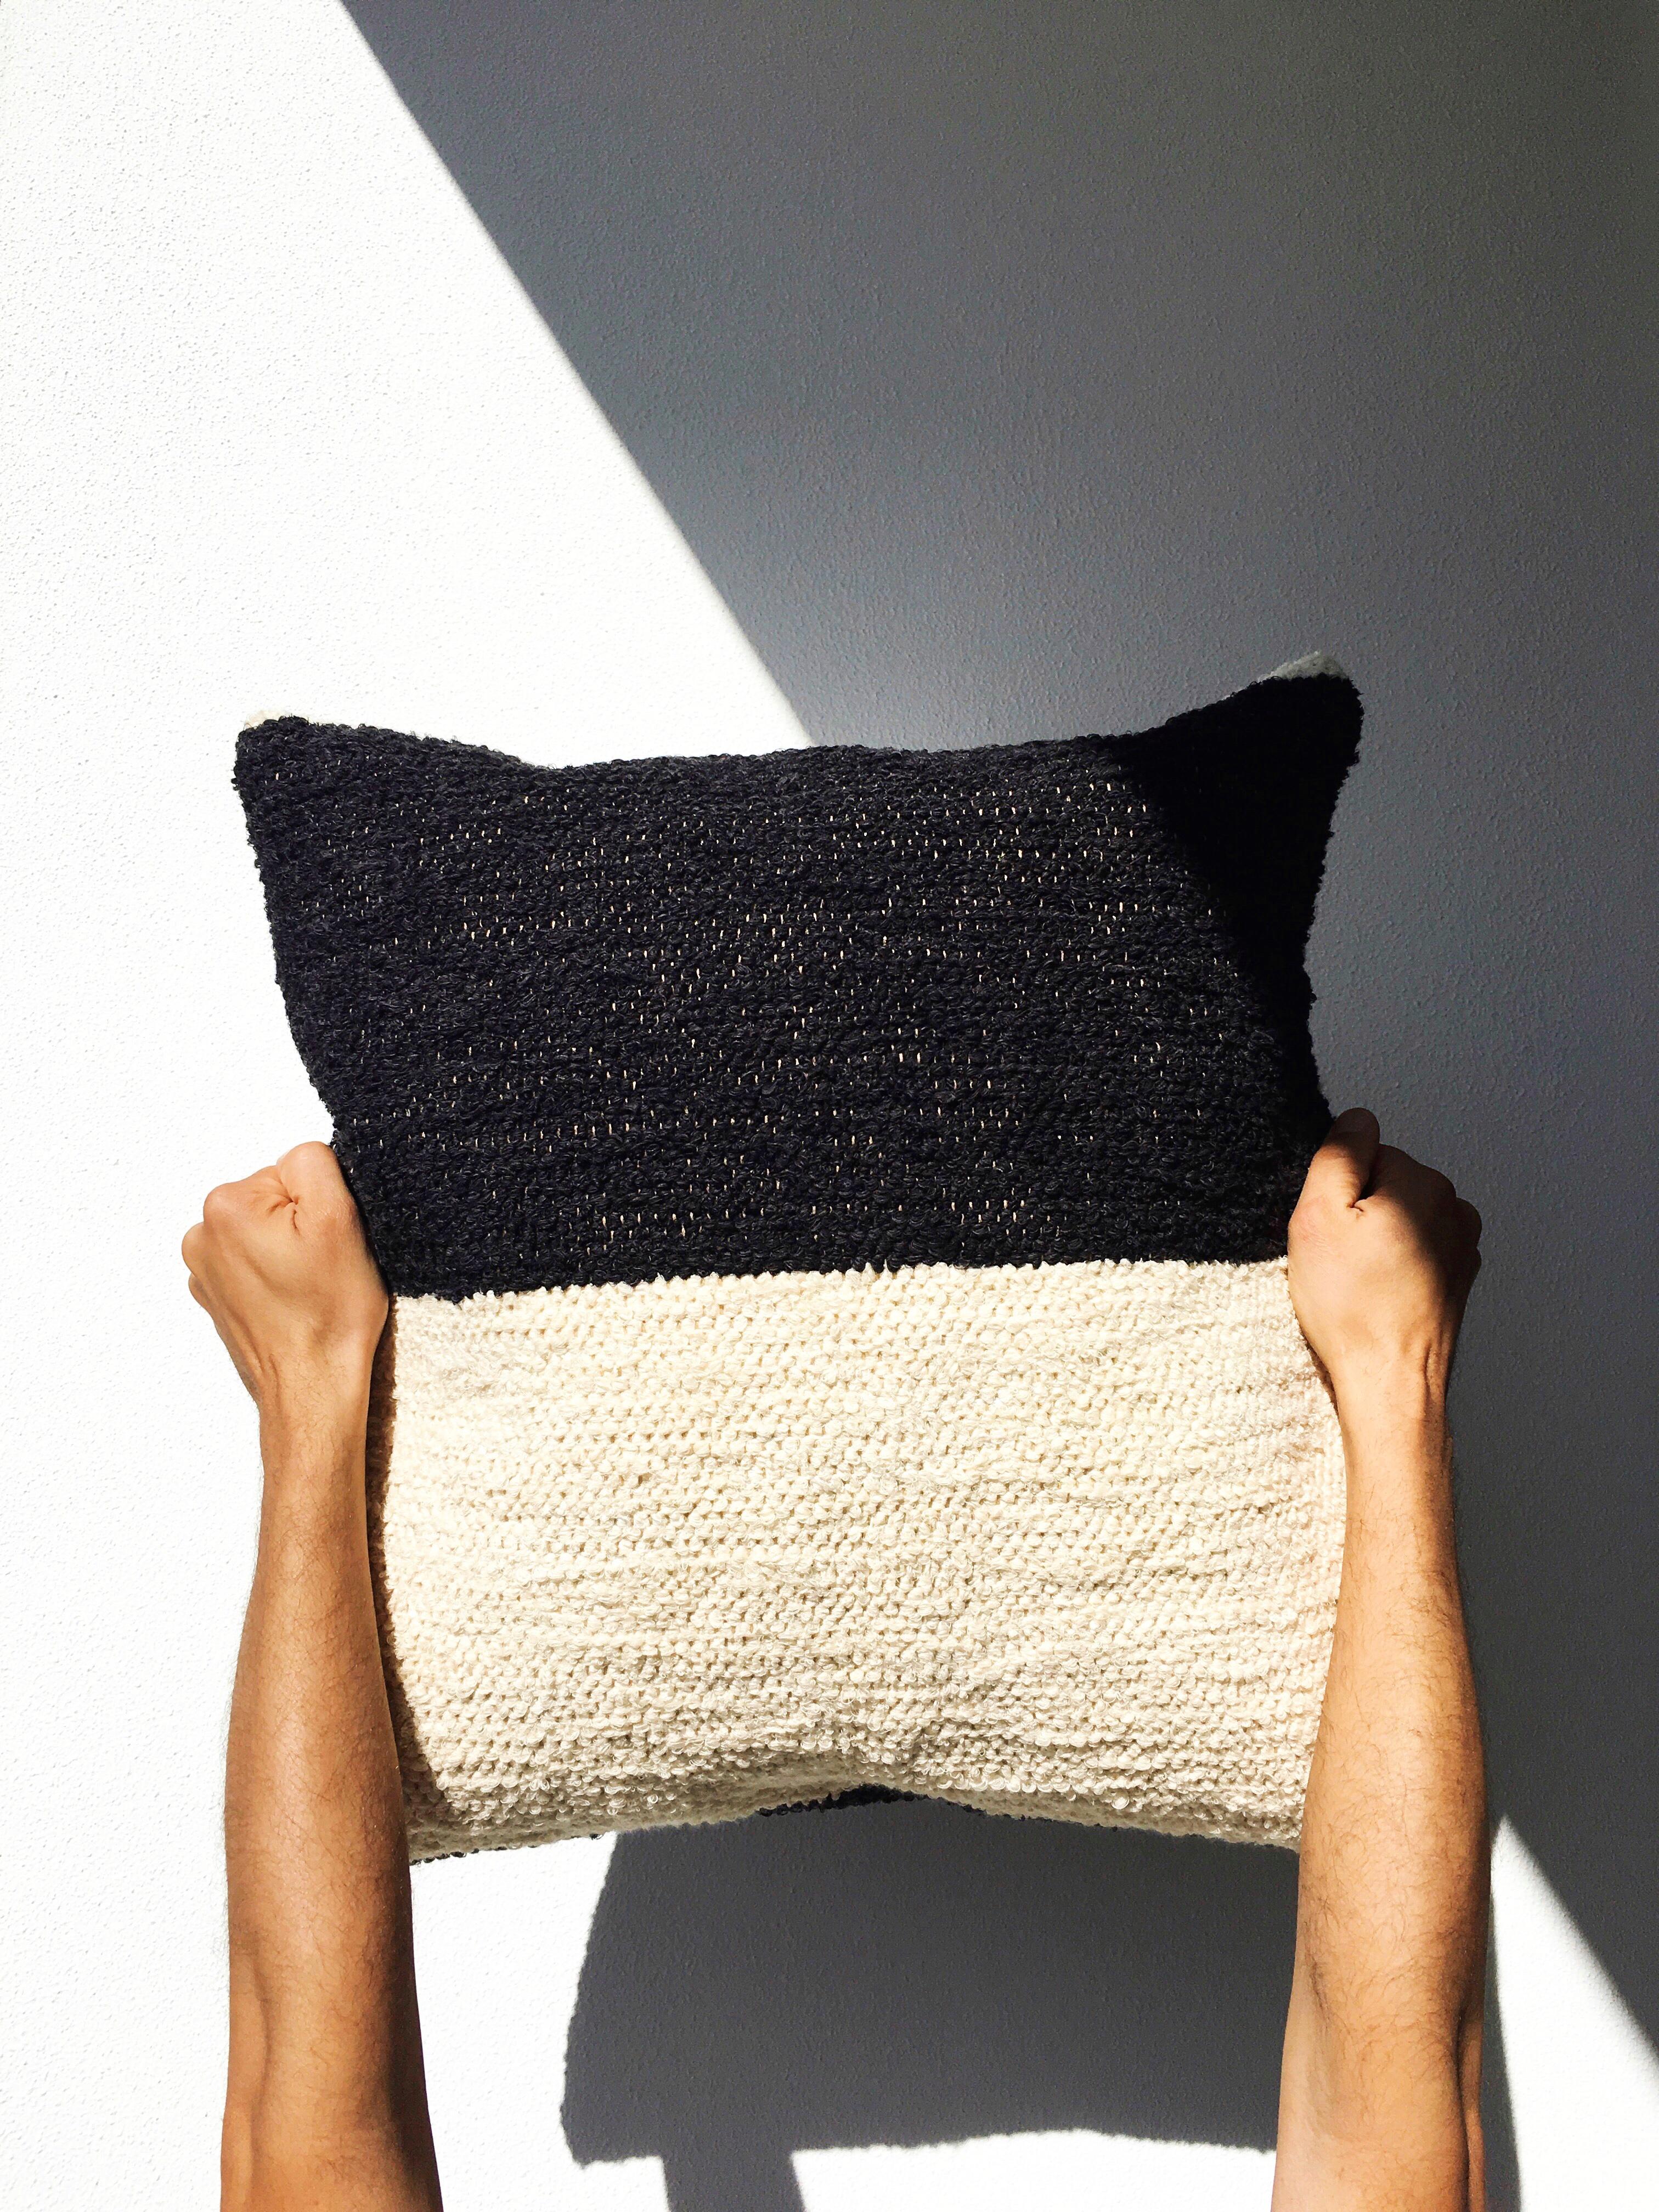 Casa Cubista Handwoven Cotton Black and White Color Block Throw Pillow, in Stock In New Condition For Sale In West Hollywood, CA